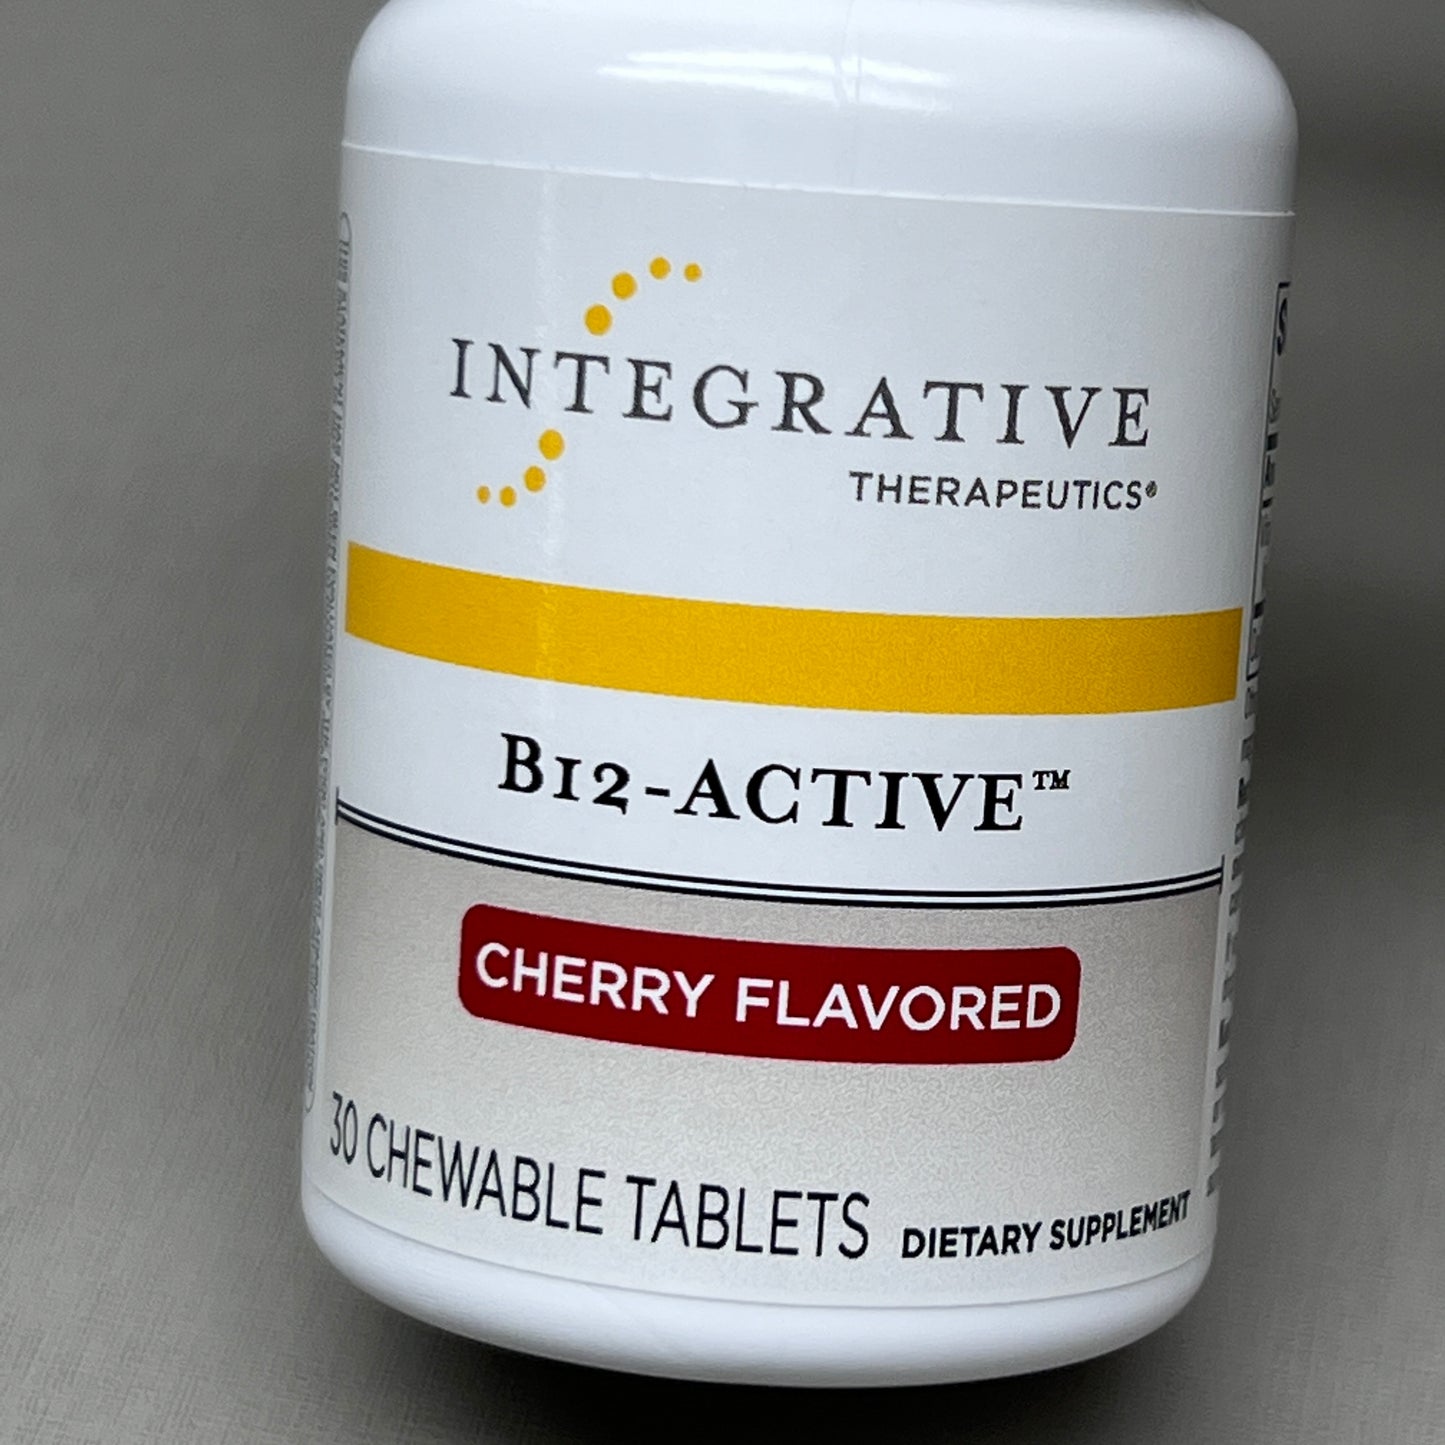 INTEGRATIVE THERAPEUTICS B12-Active Supplement 30 Chewable Tablets 6/25 (New)